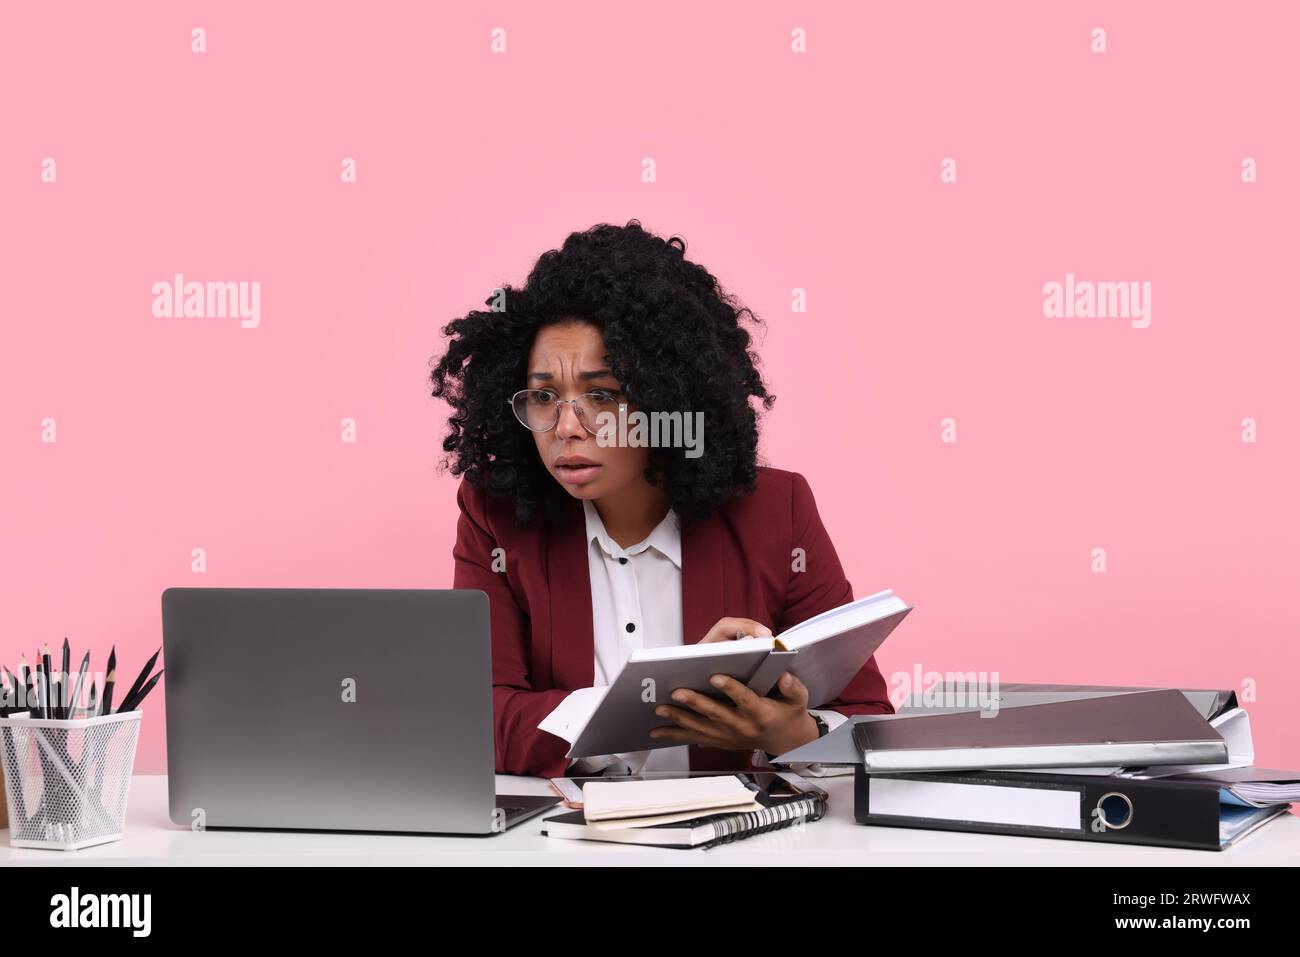 Stressful deadline. Tired woman working at white desk against pink background Stock Photo